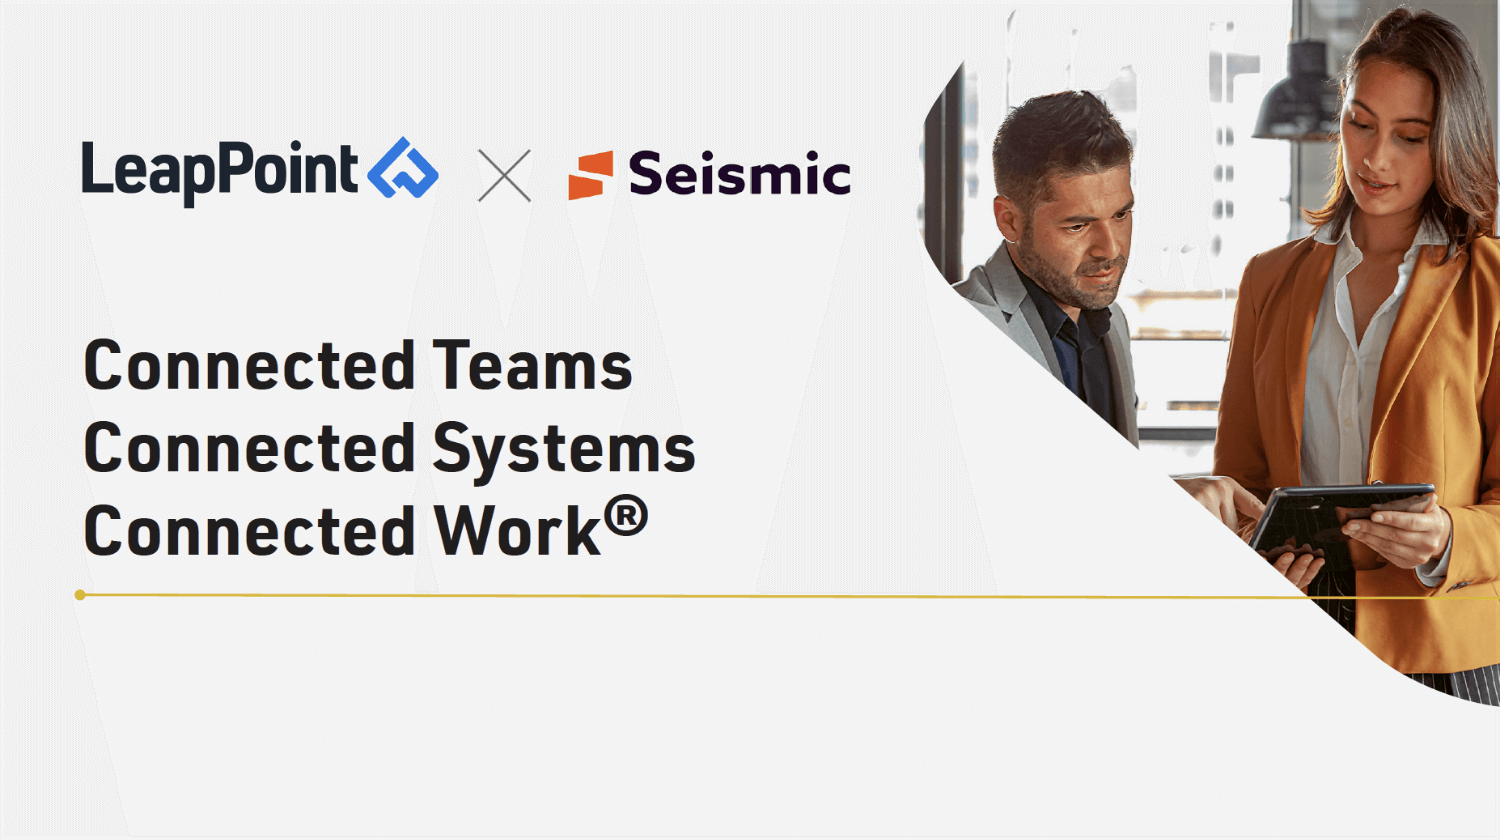 LeapPoint and Seismic logos connected teams, connected systems, connected work